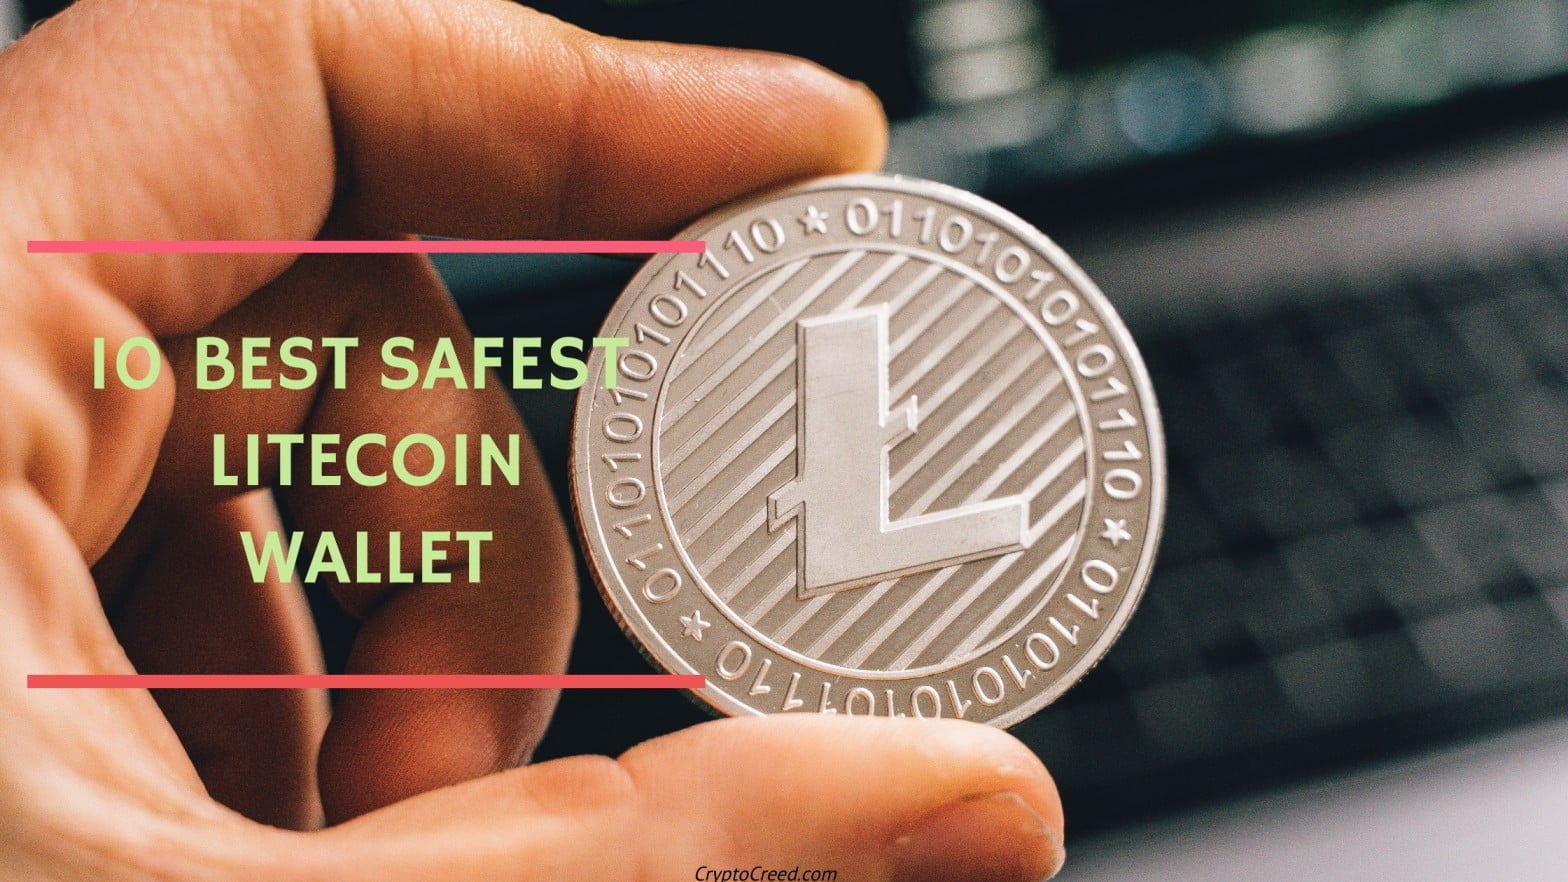 can i use bitcoin wallet for litecoin